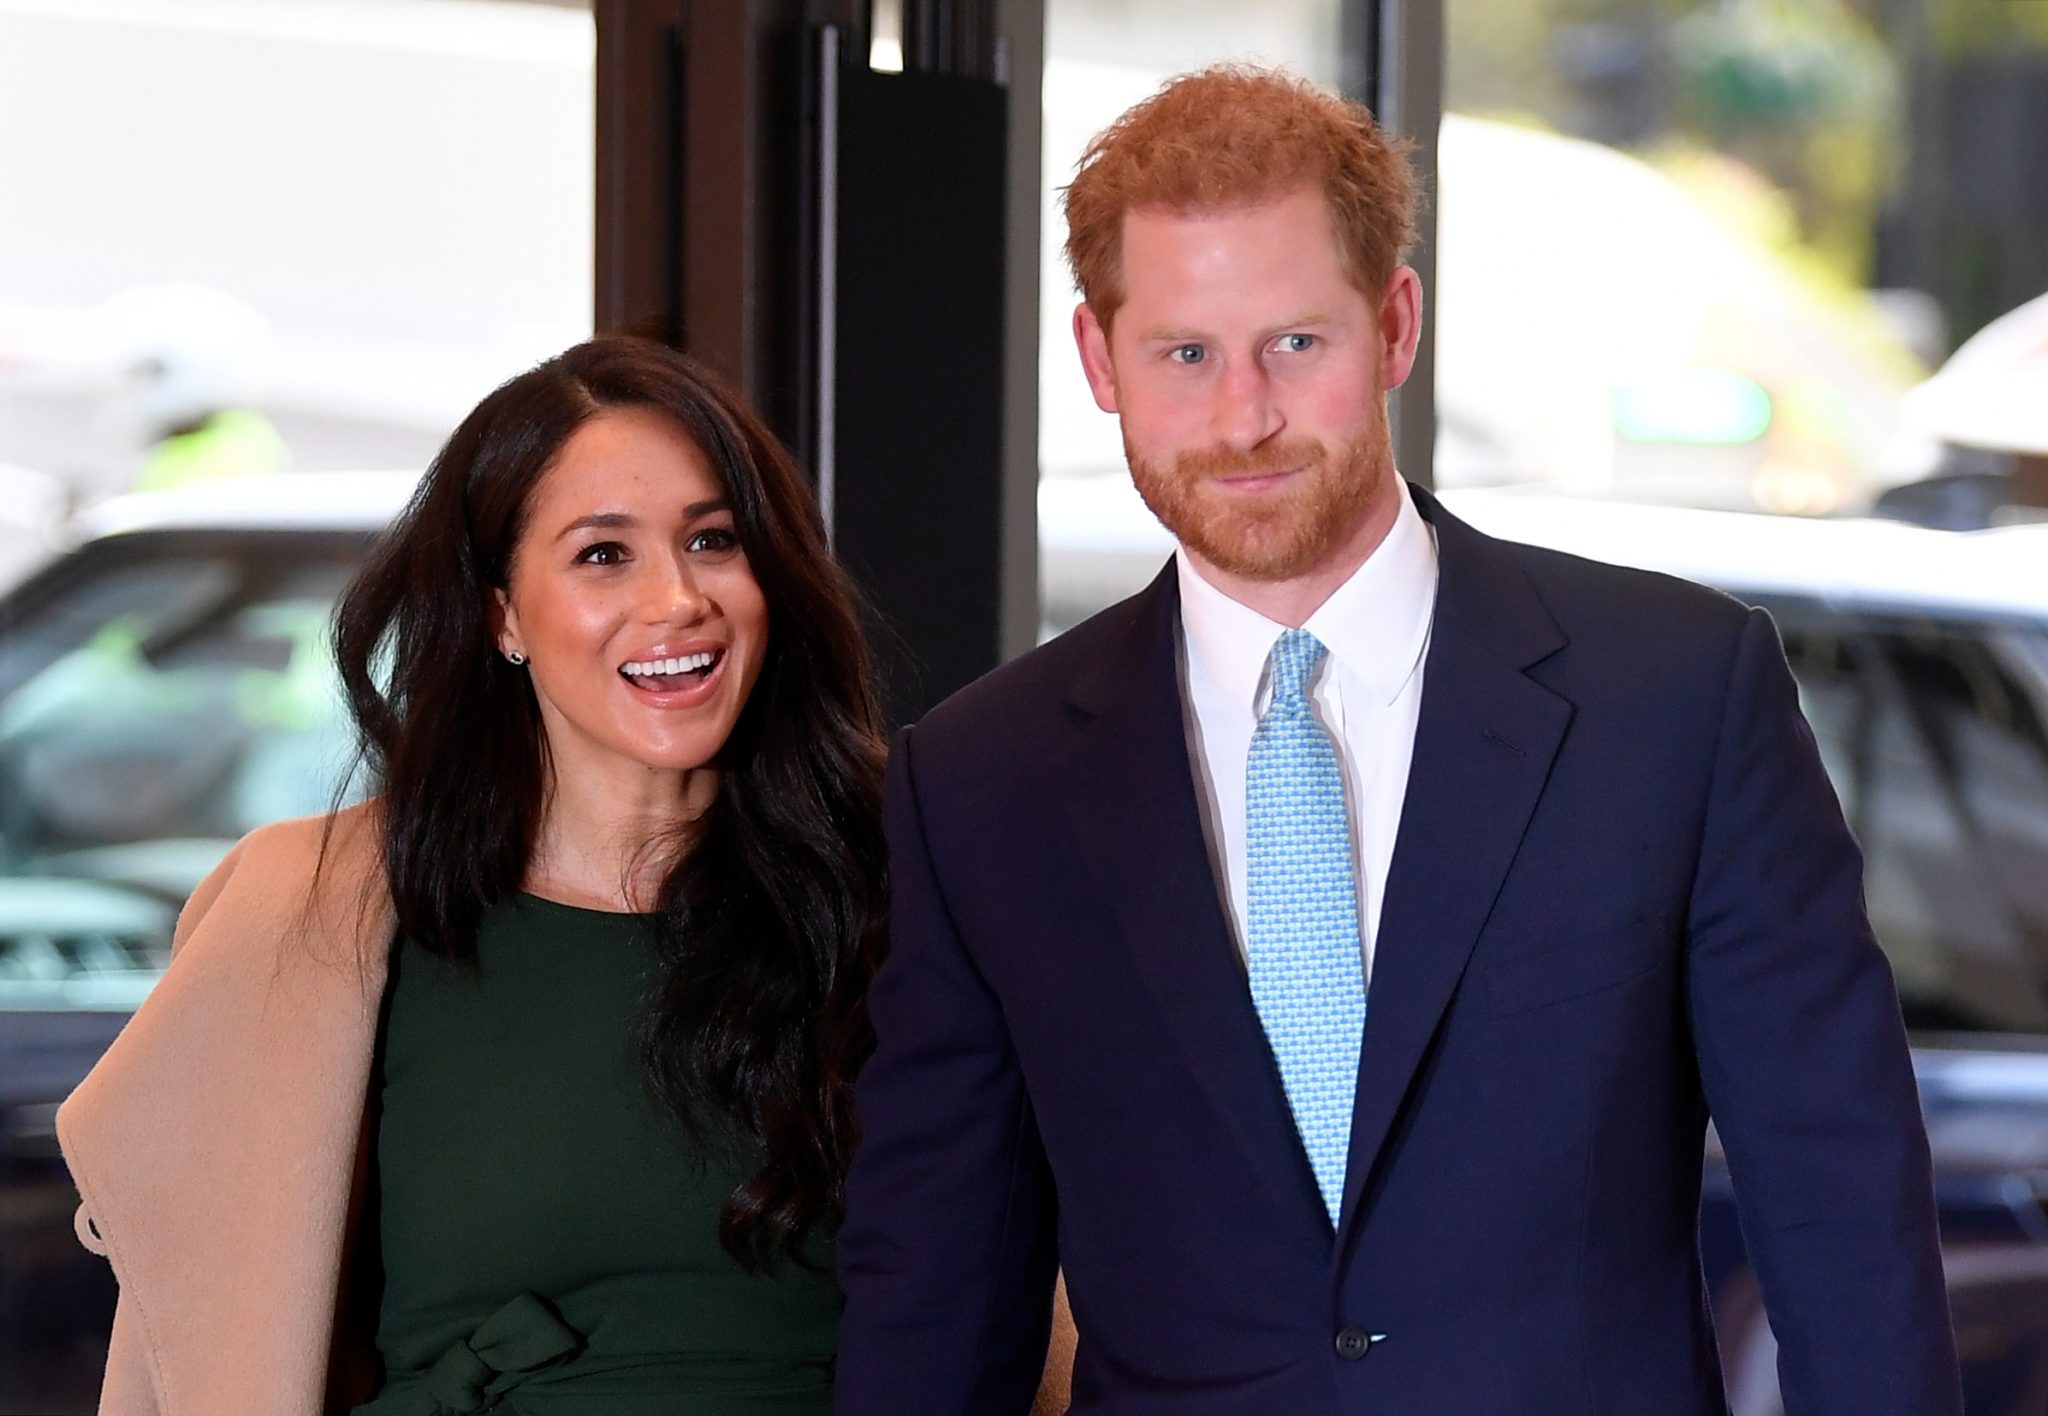 Meghan Markle and Prince Harry ‘to break royal tradition’ with their Christmas card